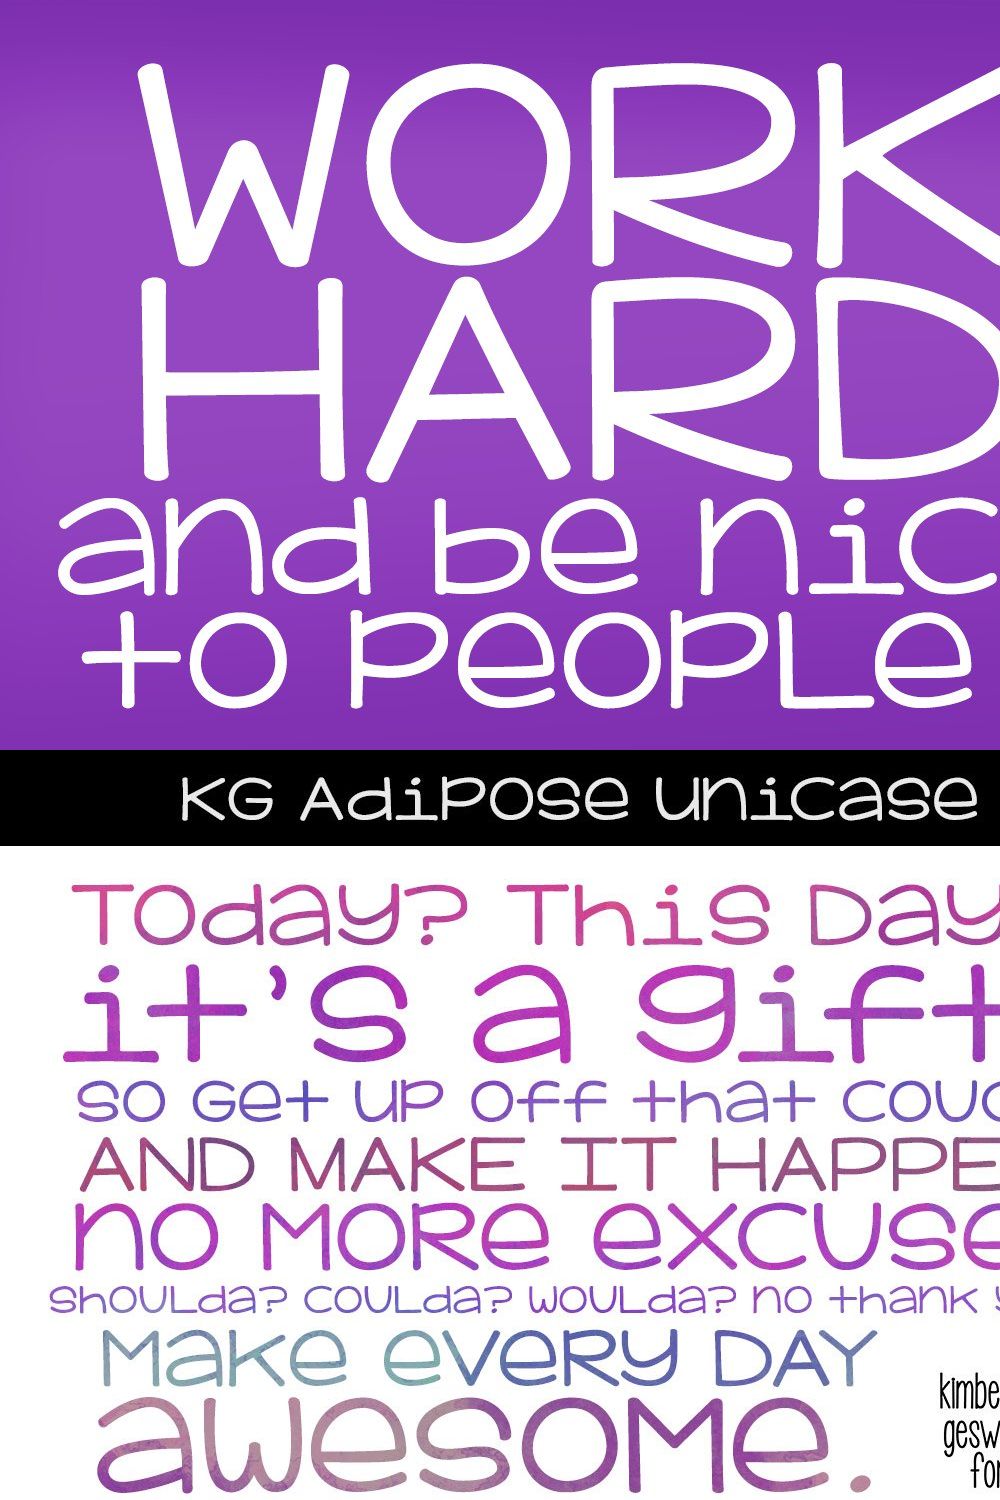 KG Adipose Unicase pinterest preview image.